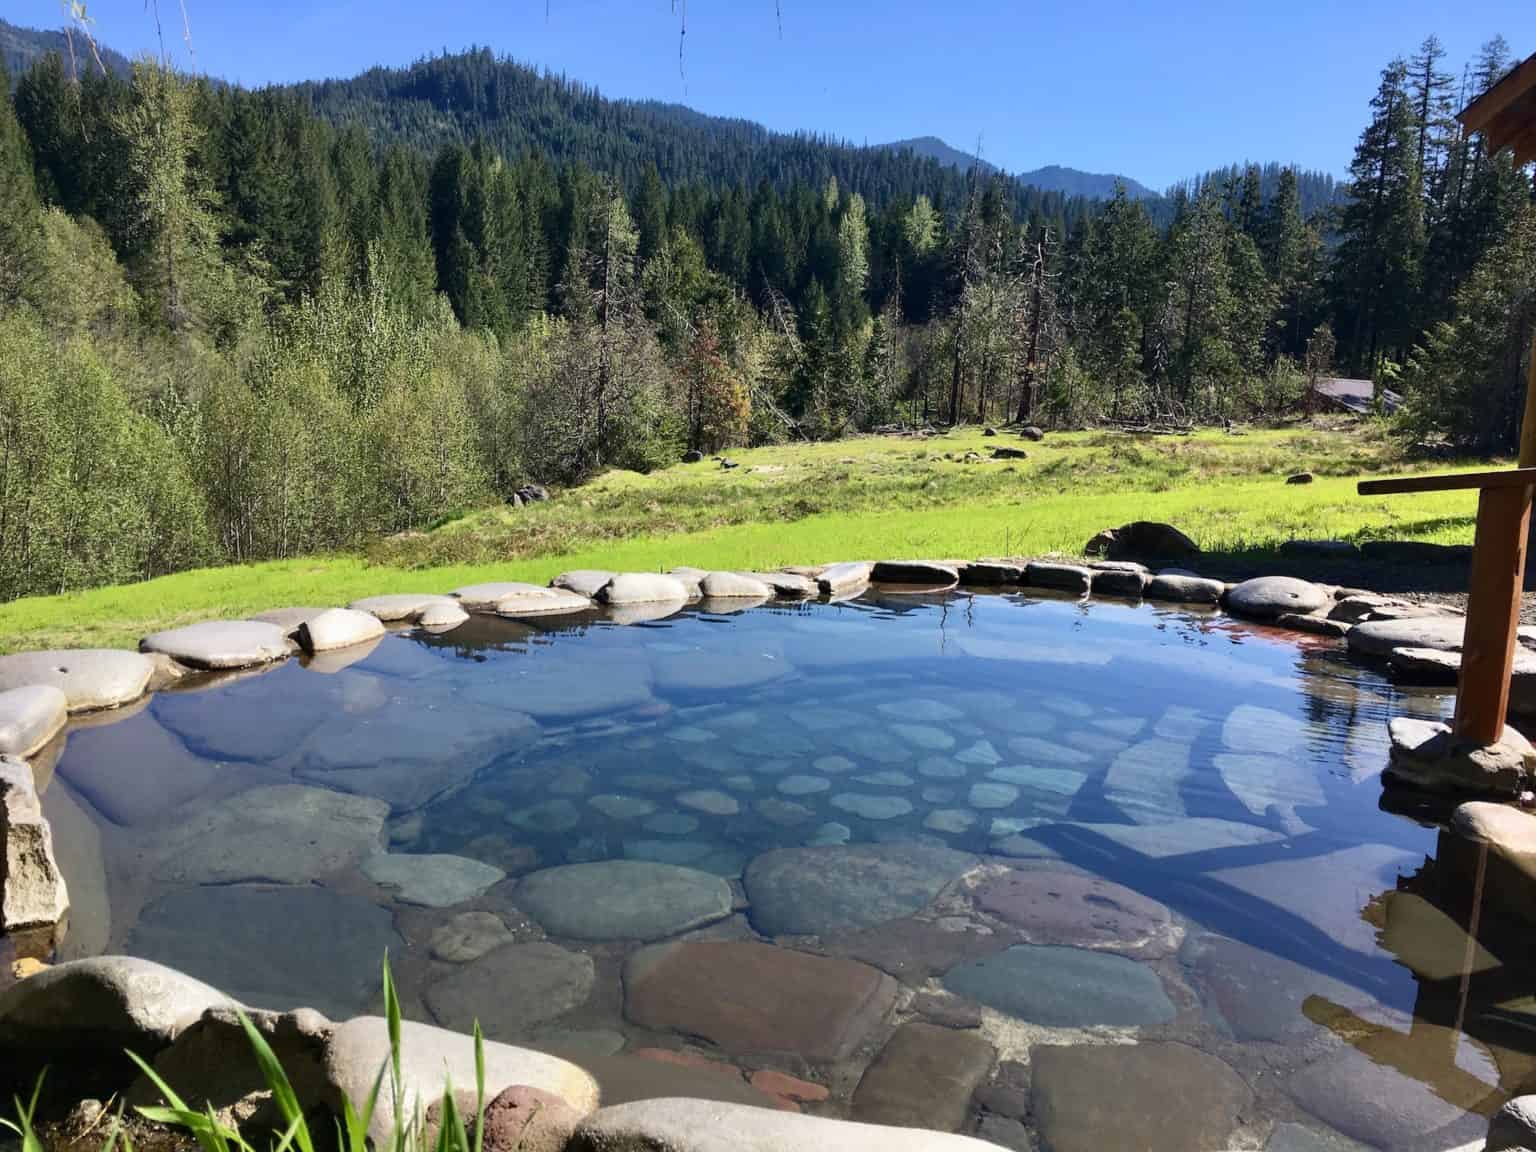 Update From Breitenbush Hot Springs After The Fire Holistic Centers Network 